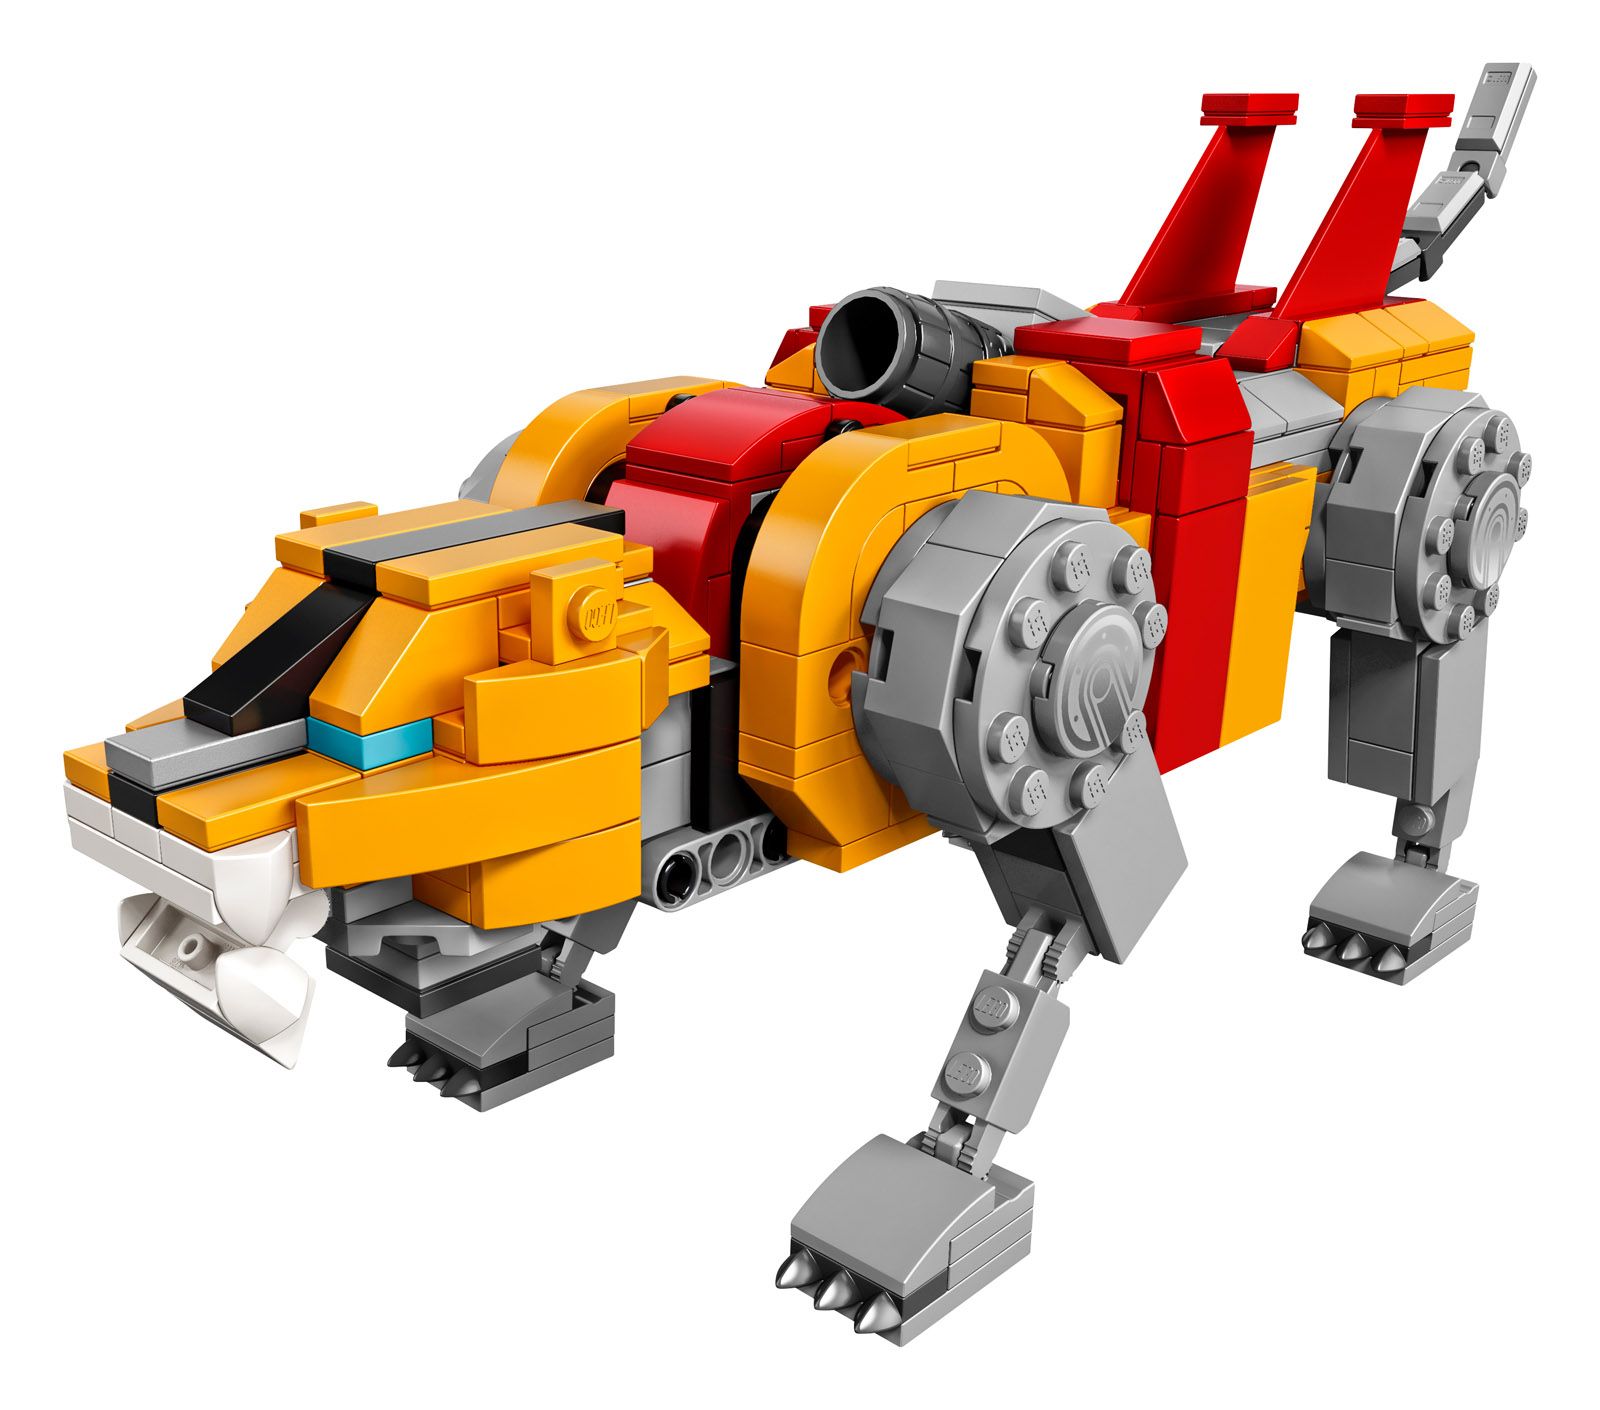 Voltron Legendary Defender Is The MustHave LEGO Set of 2018